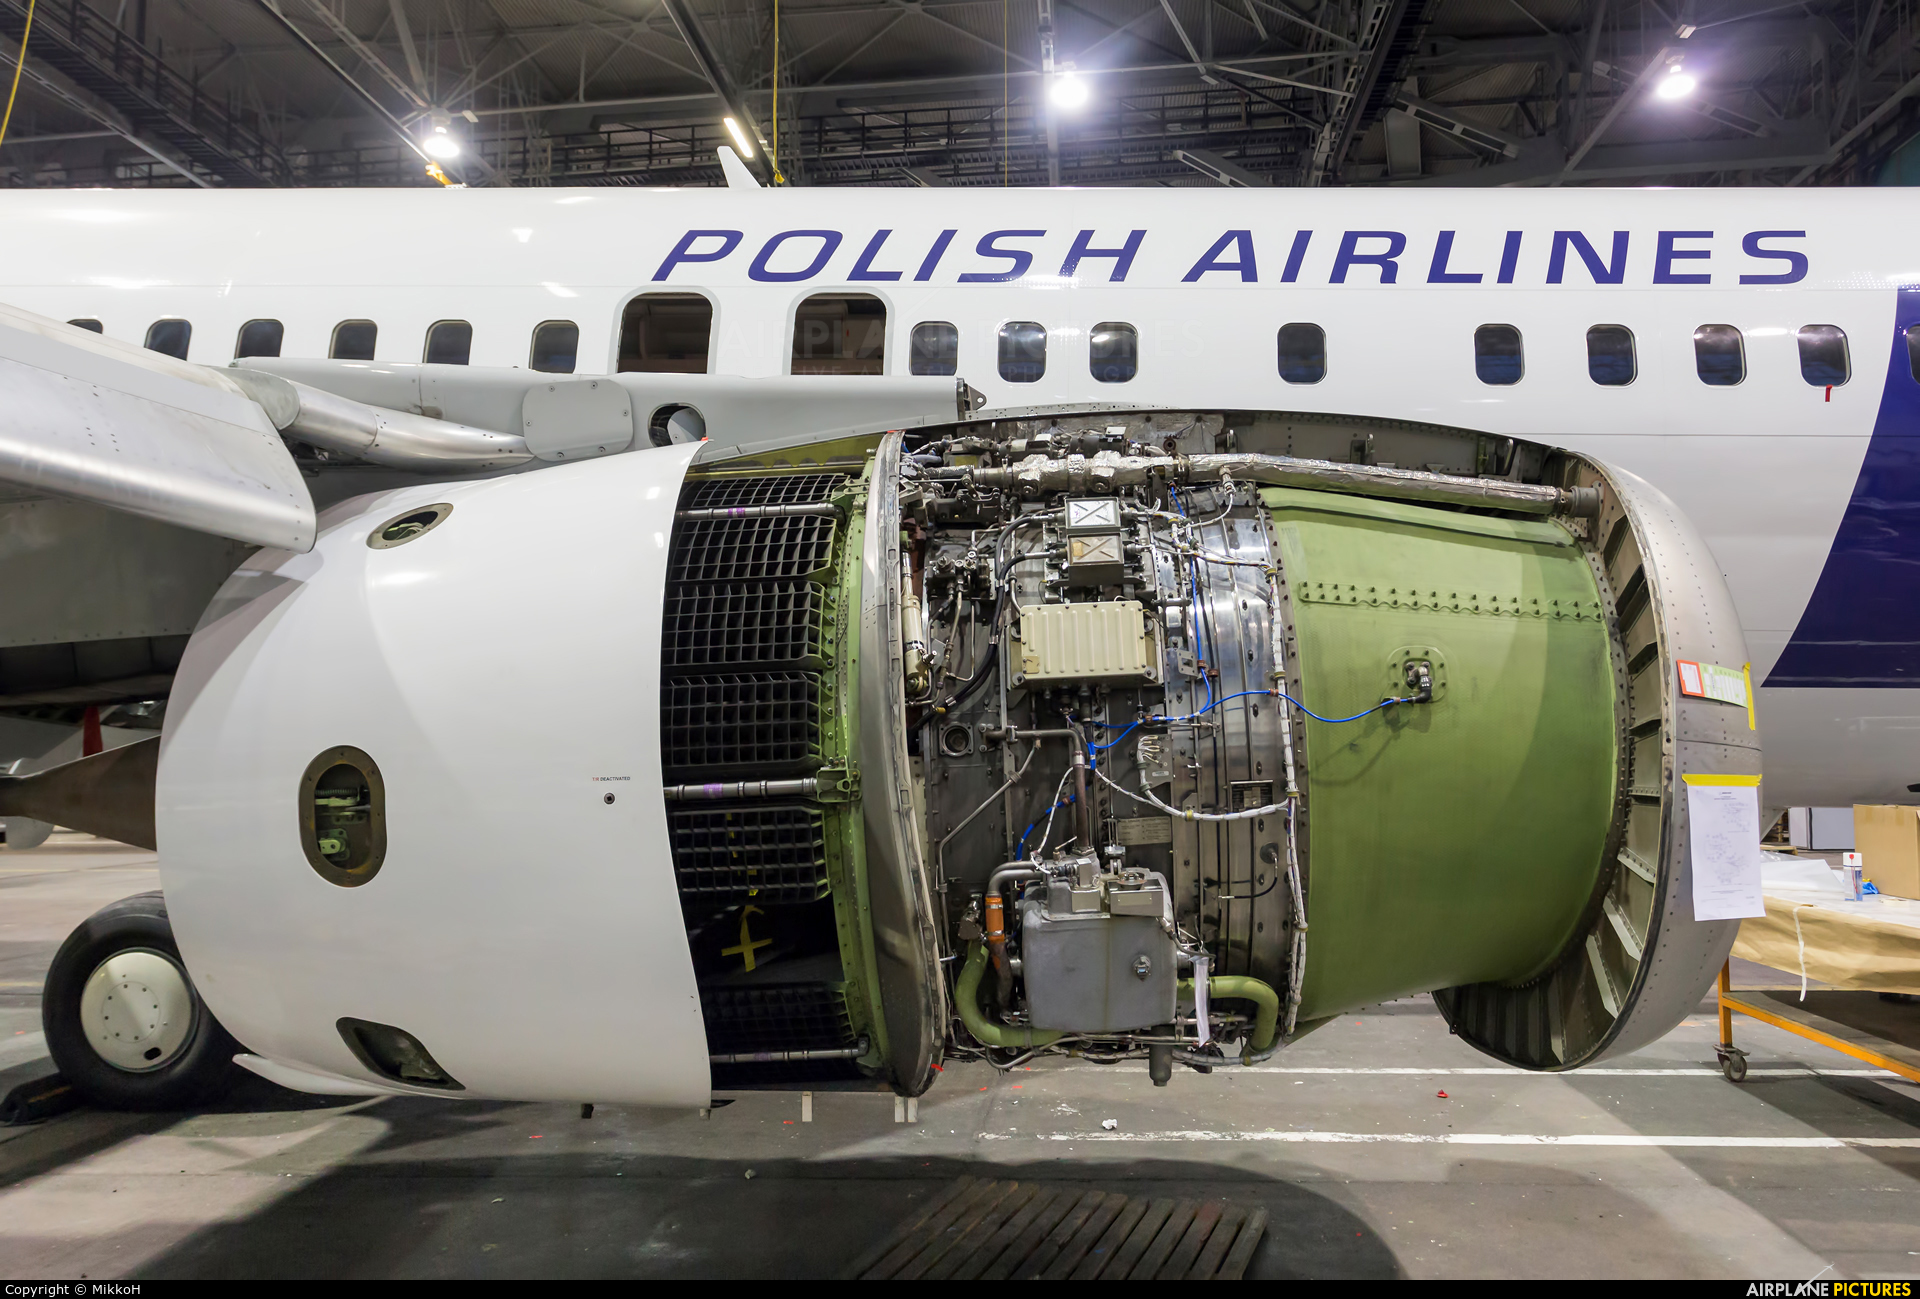 LOT - Polish Airlines SP-LLE aircraft at Warsaw - Frederic Chopin